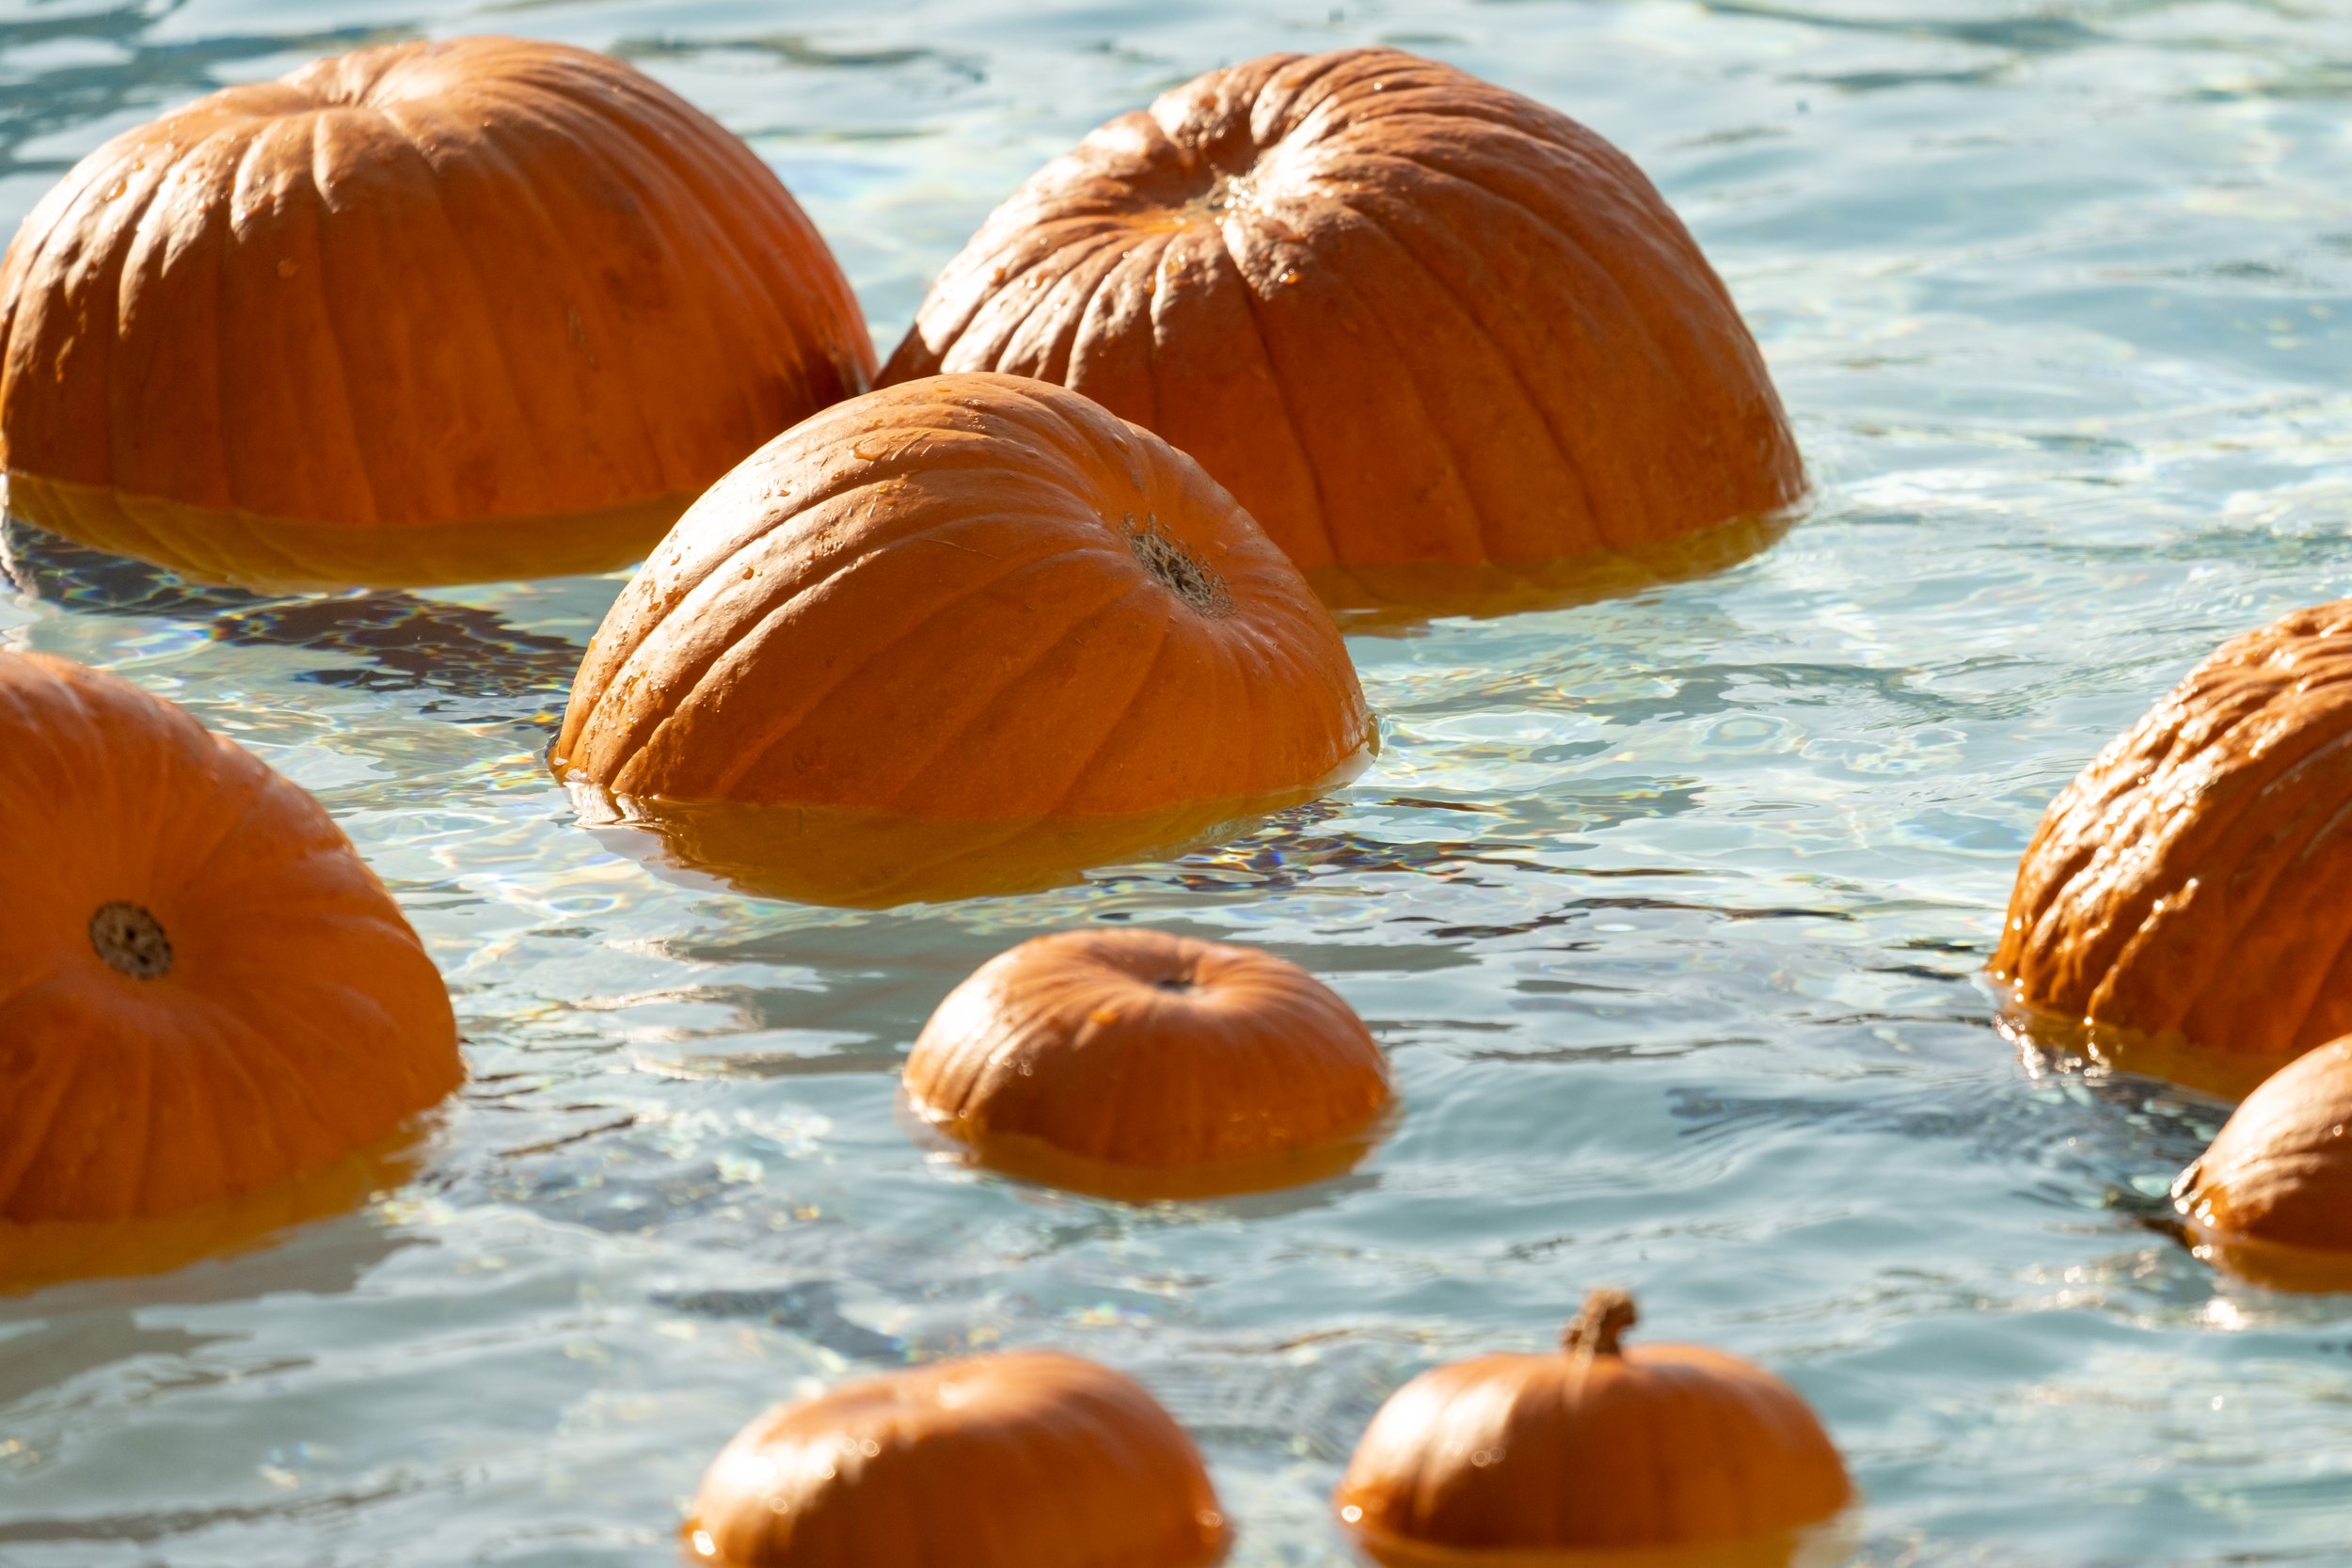  On Friday, October 27th, the Santa Monica Swim Center held their Halloween Spooky Splash Spectacular. Highlights included the Floating Pumpkin Patch in the Splash Pool, Pumpkin Decorating, Haunted House, Games, and Prizes in Santa Monica, Calif. (Ak